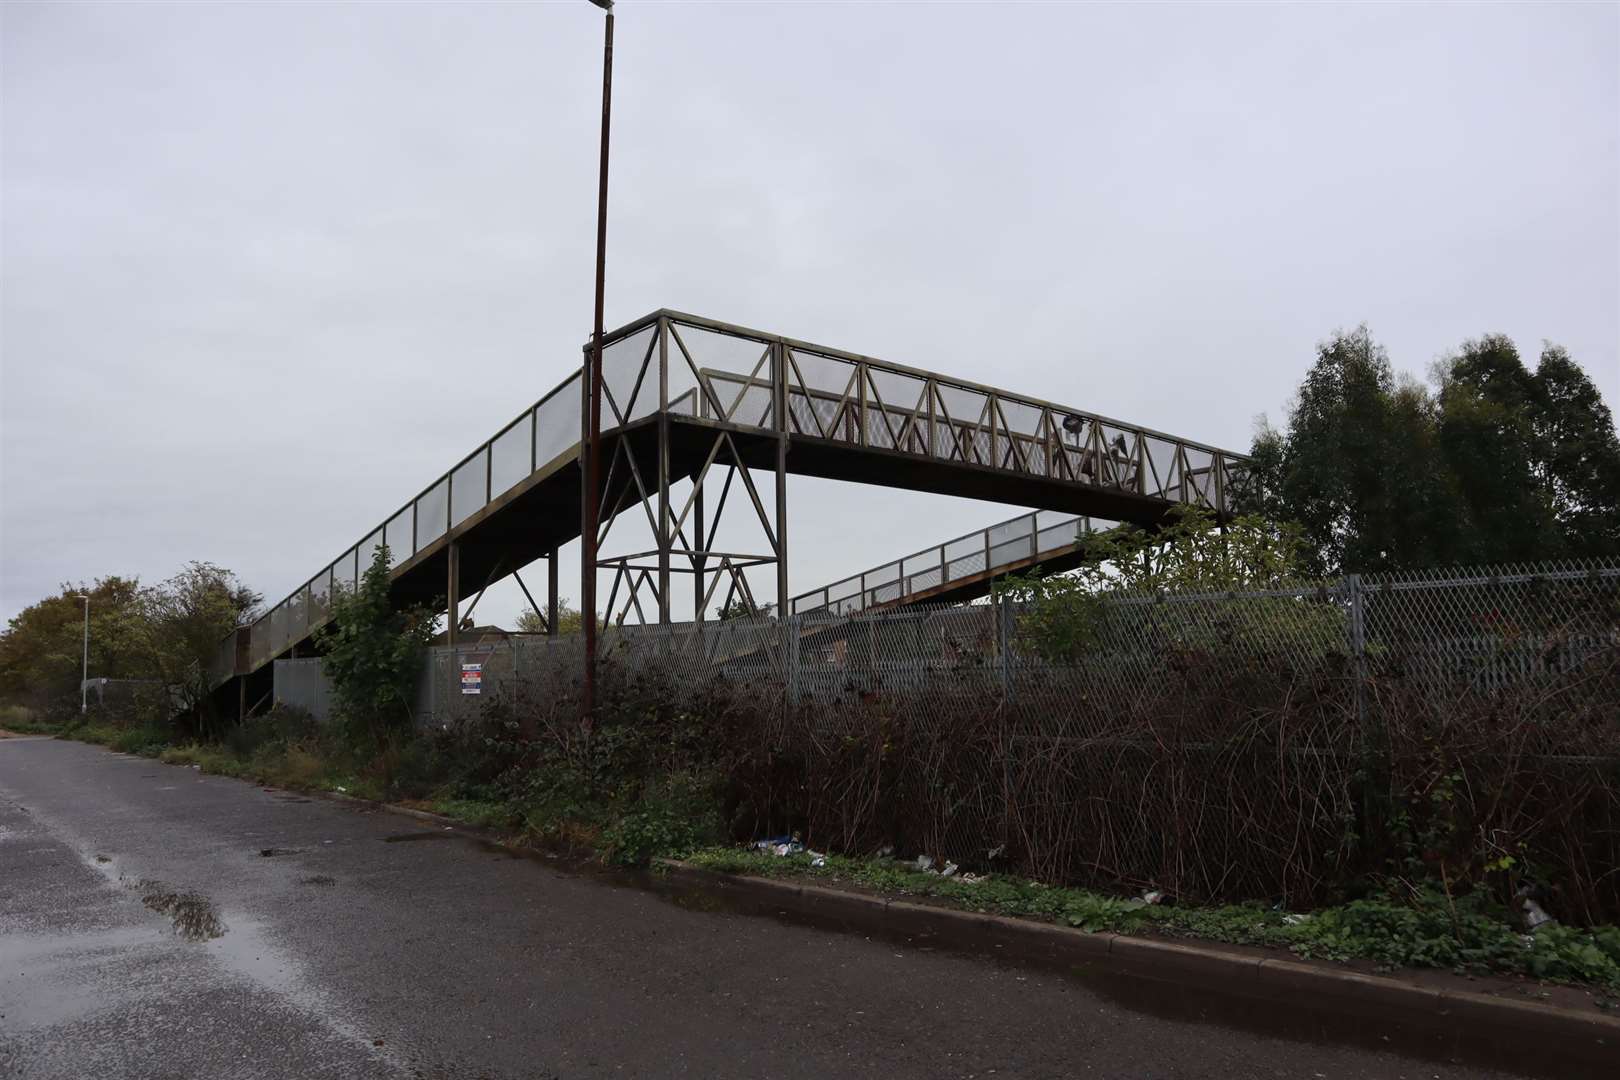 The pedestrian bridge across the railway line at West Minster on the Isle of Sheppey